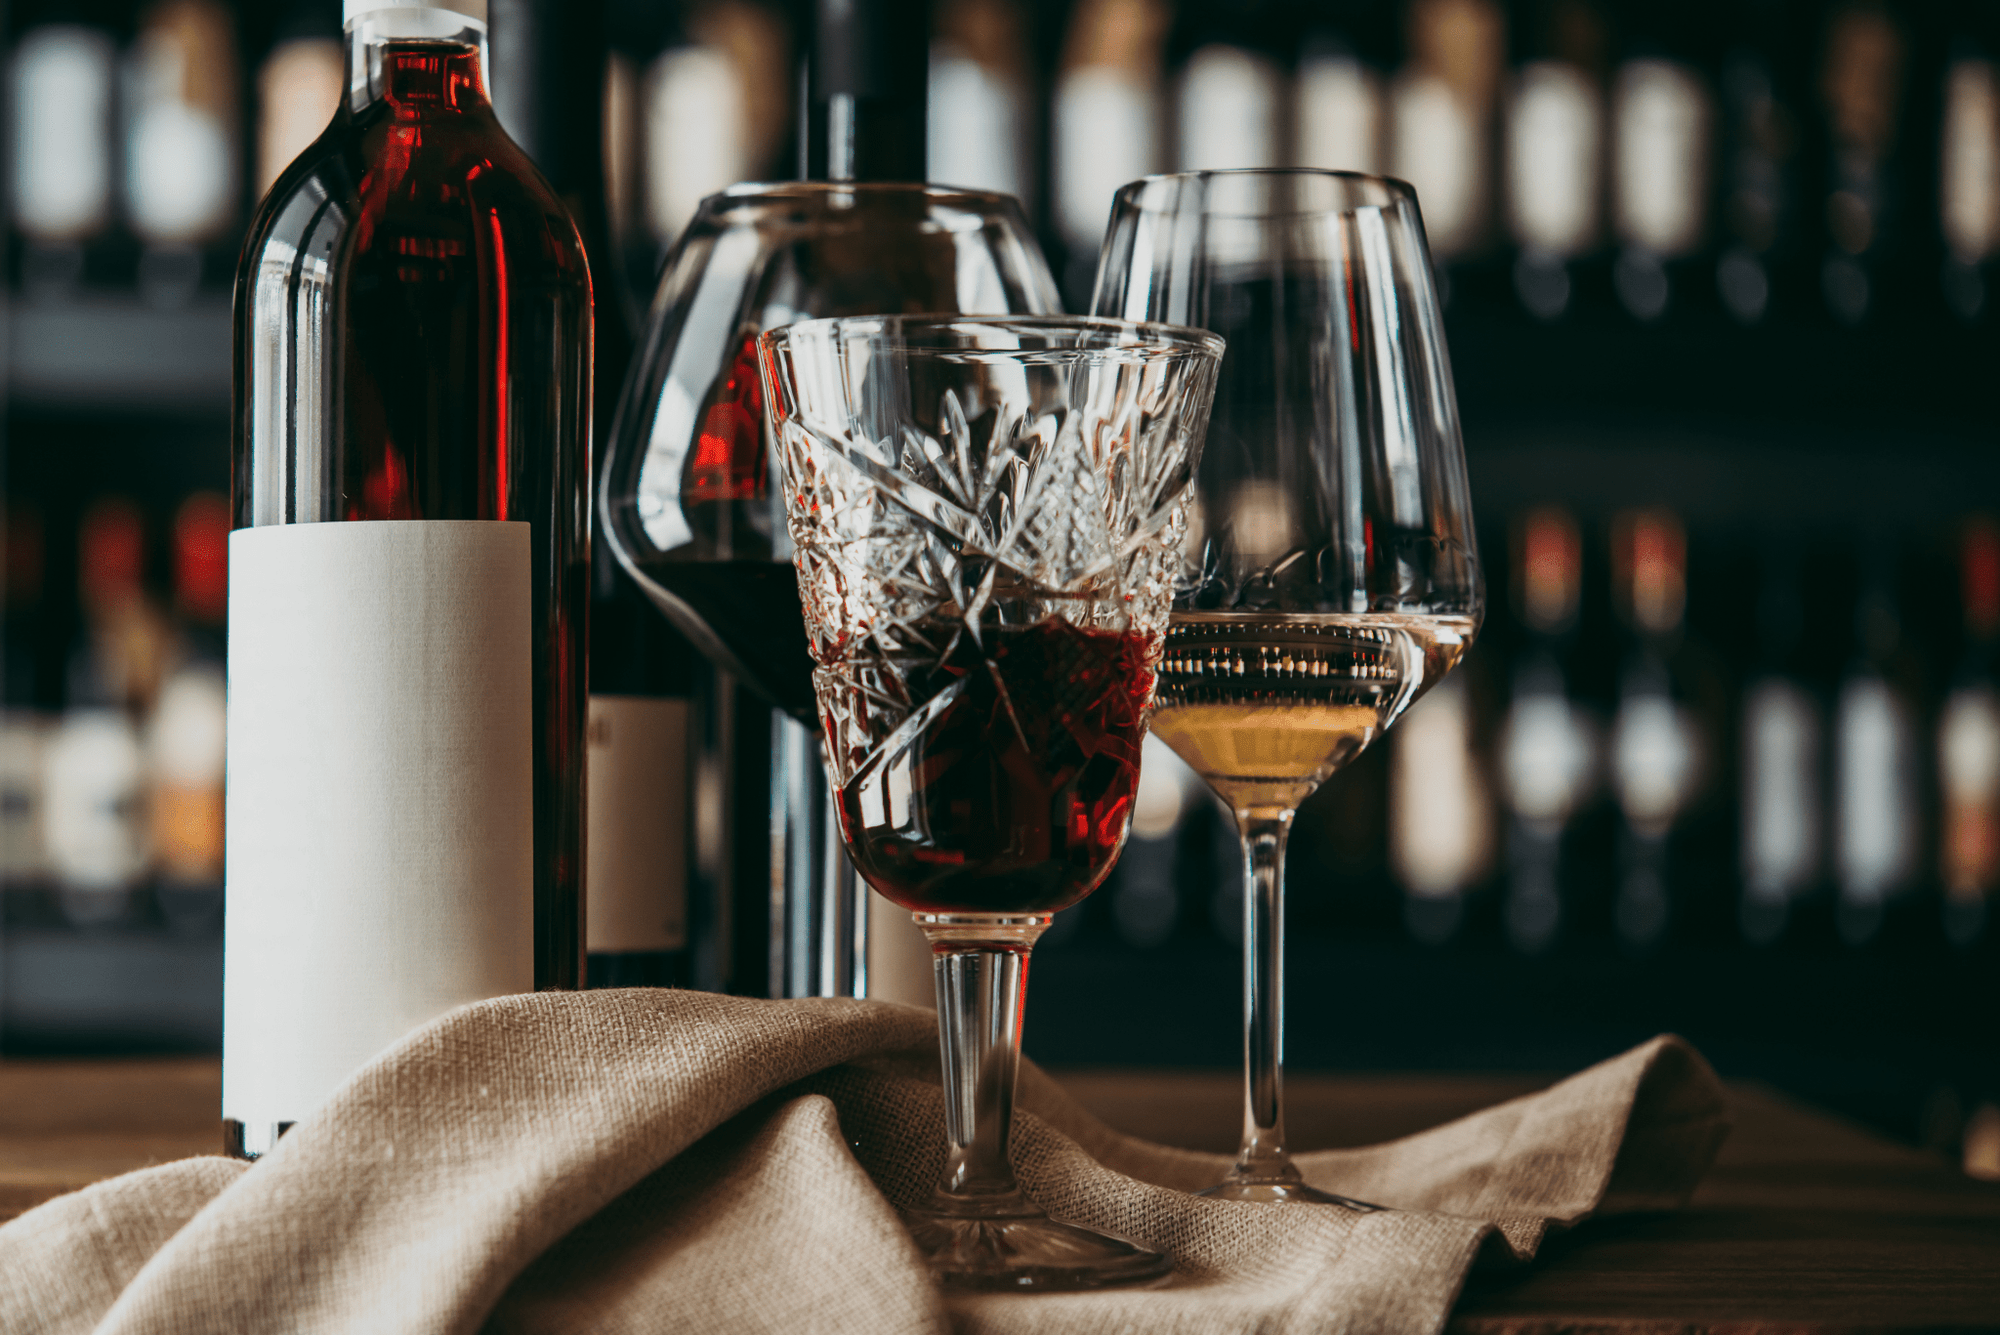 Dealcoholization: How Non-alcoholic Wine is Made - Boisson